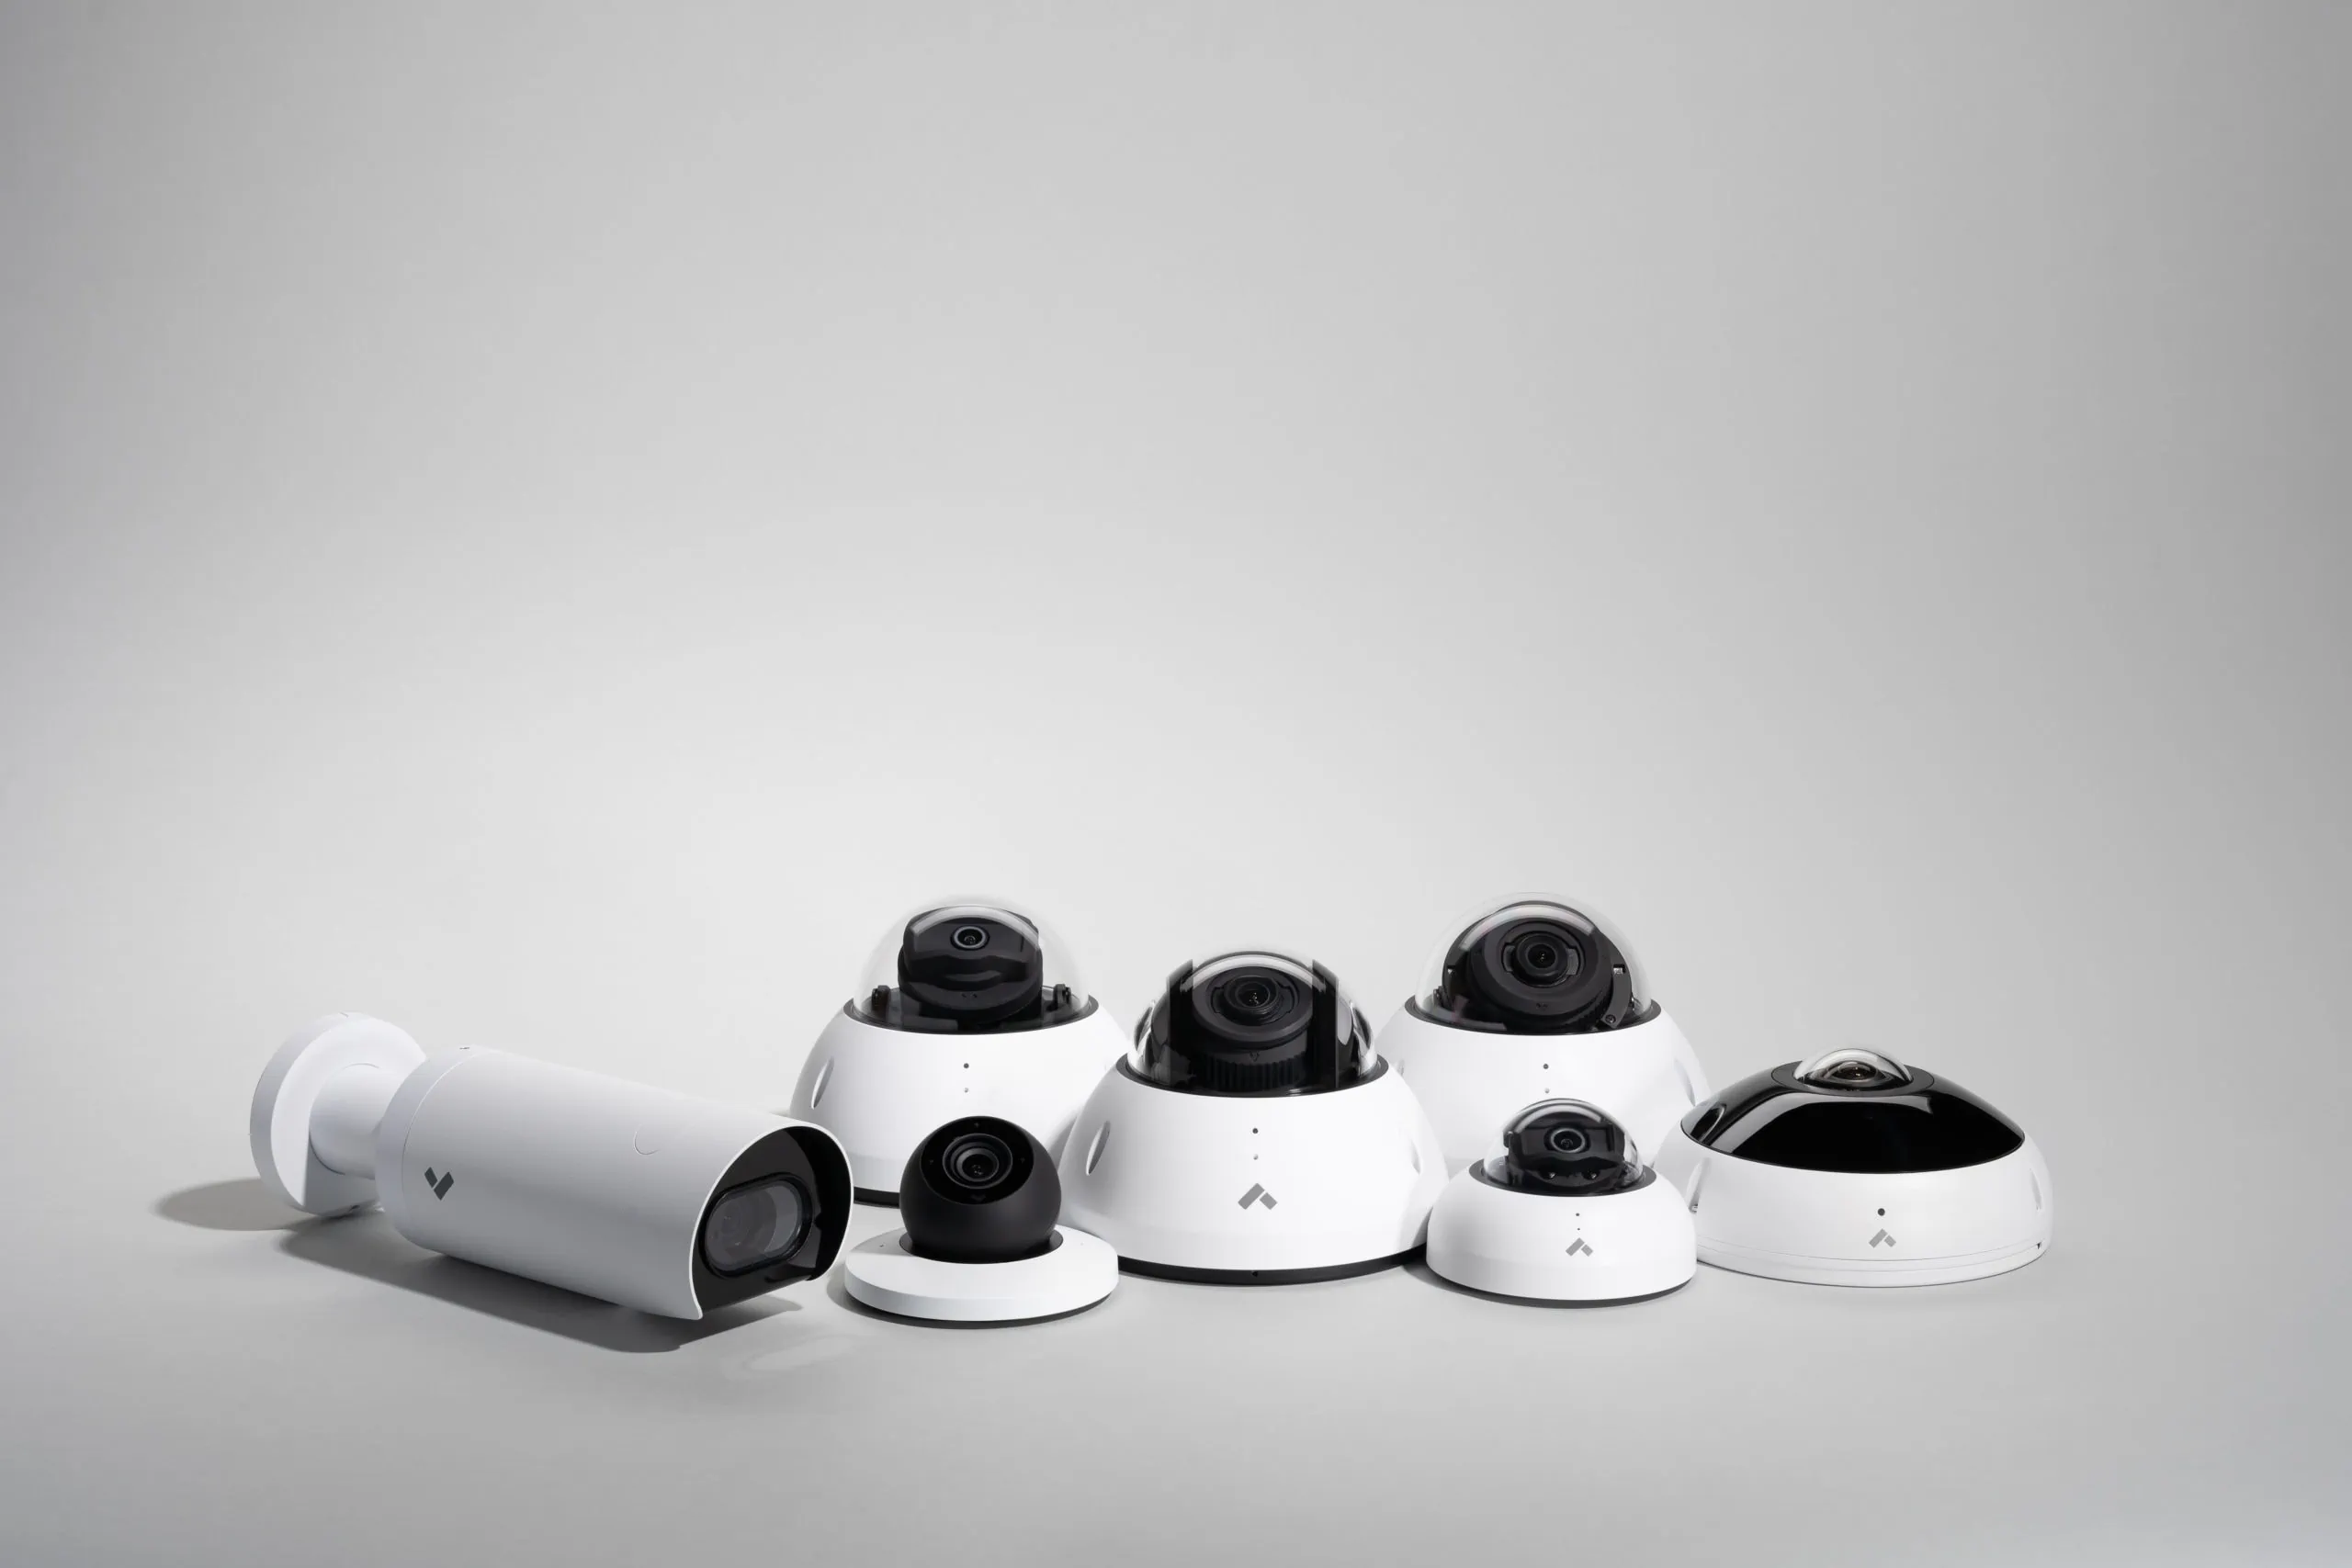 Verkada Camera family used by security professionals who monitor cameras live